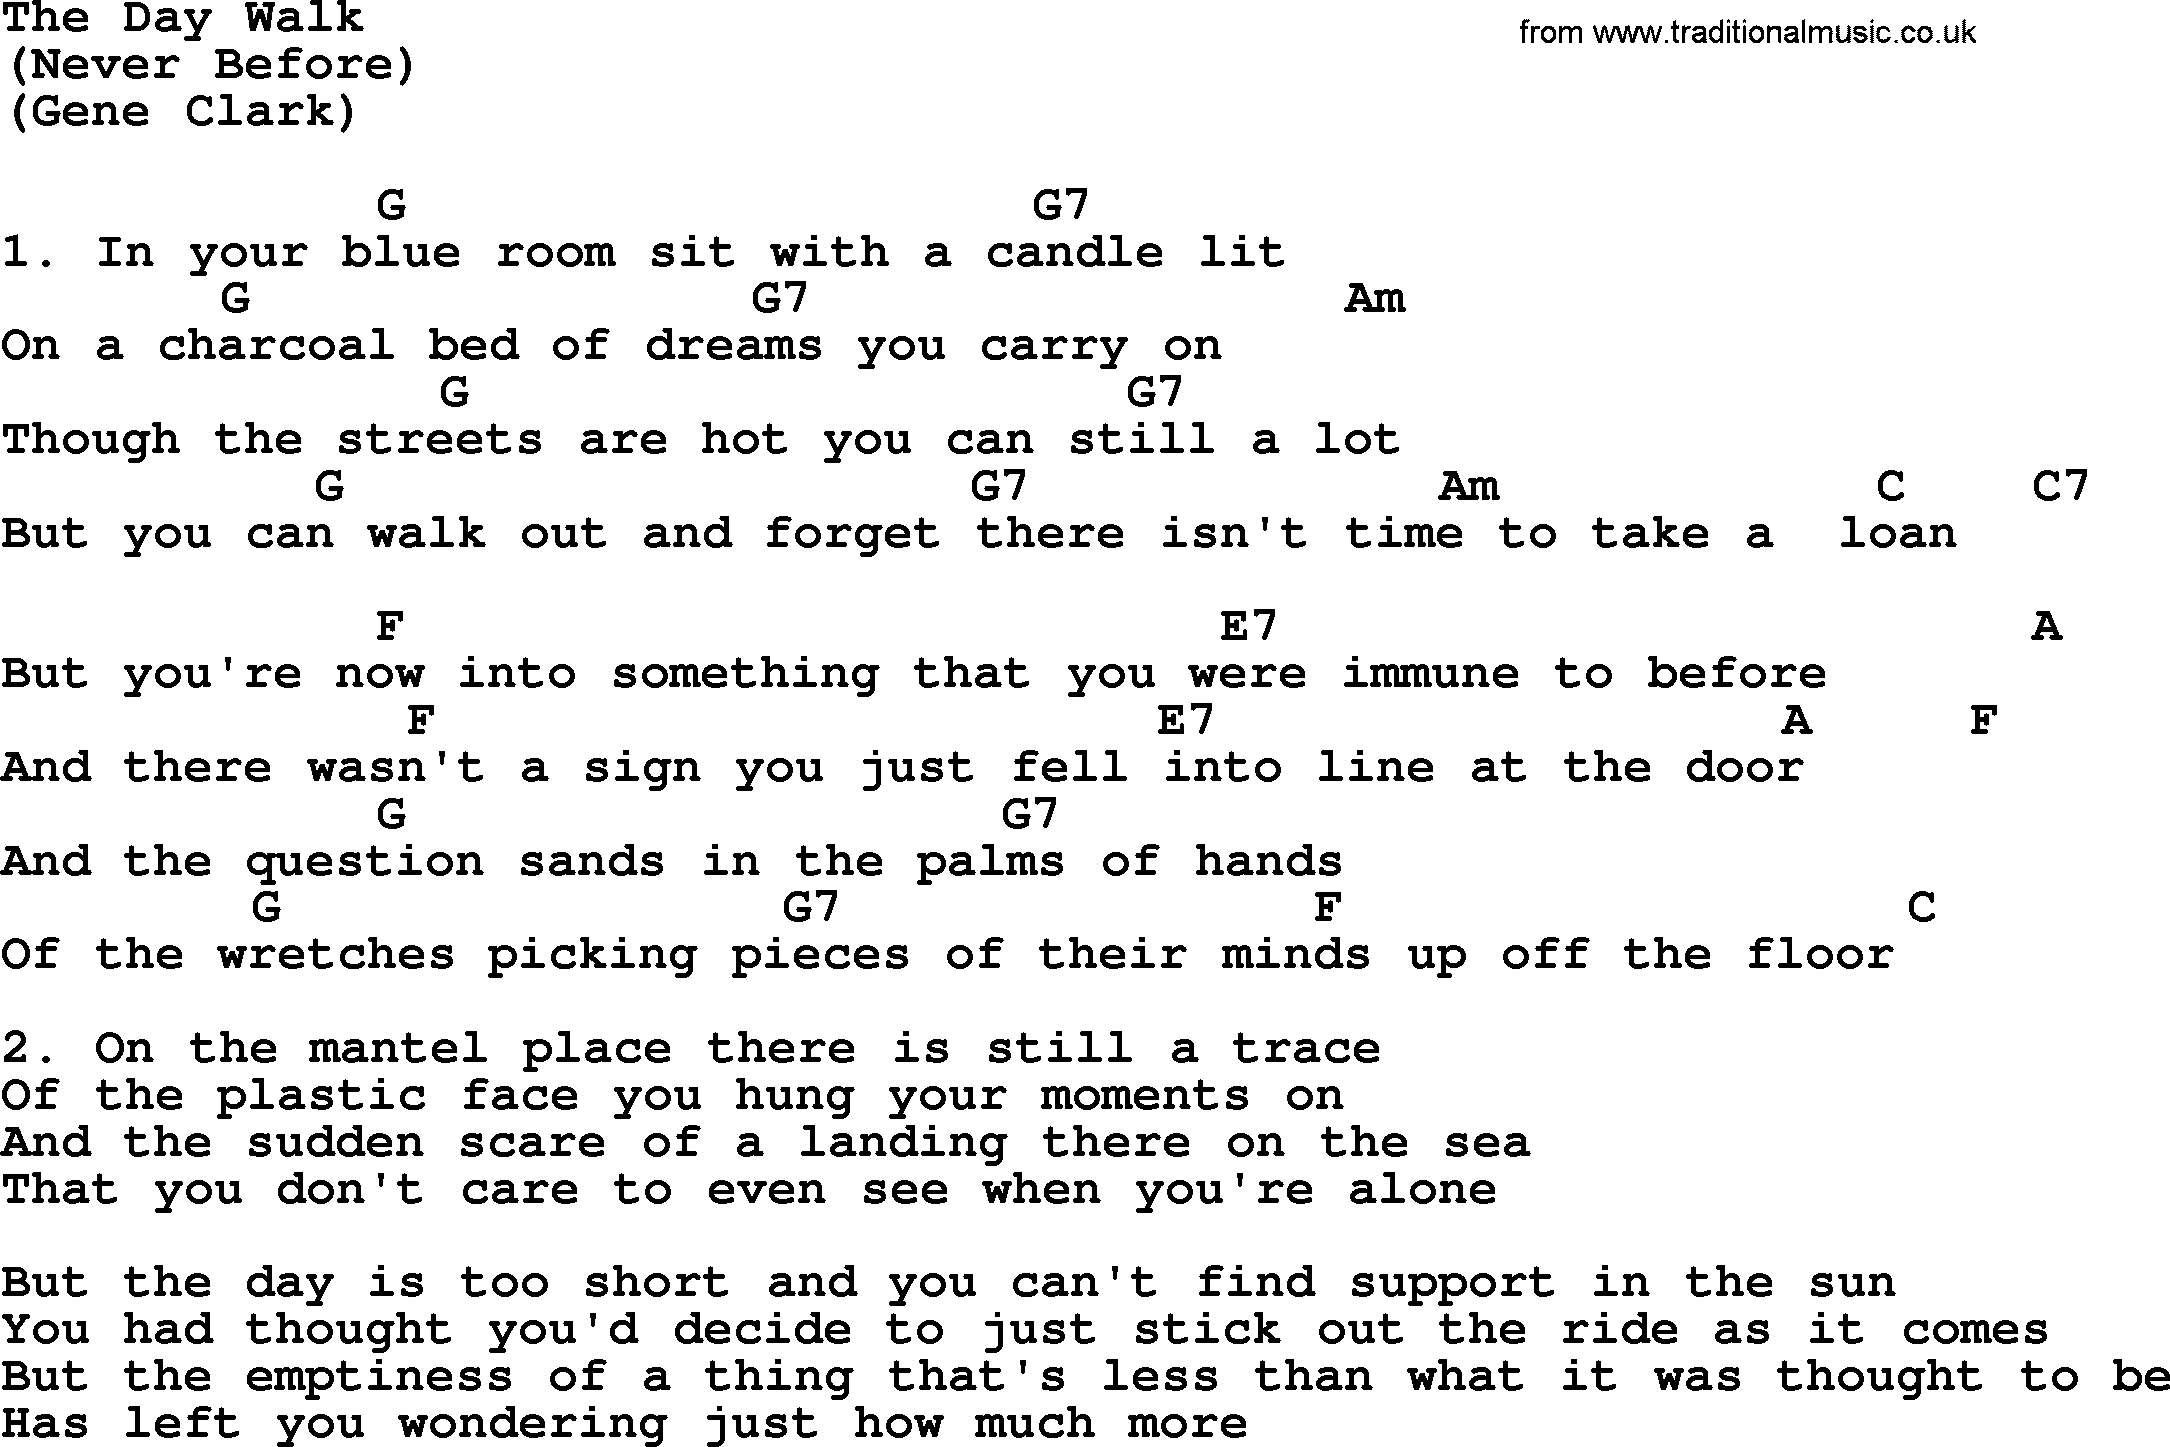 The Byrds song The Day Walk, lyrics and chords